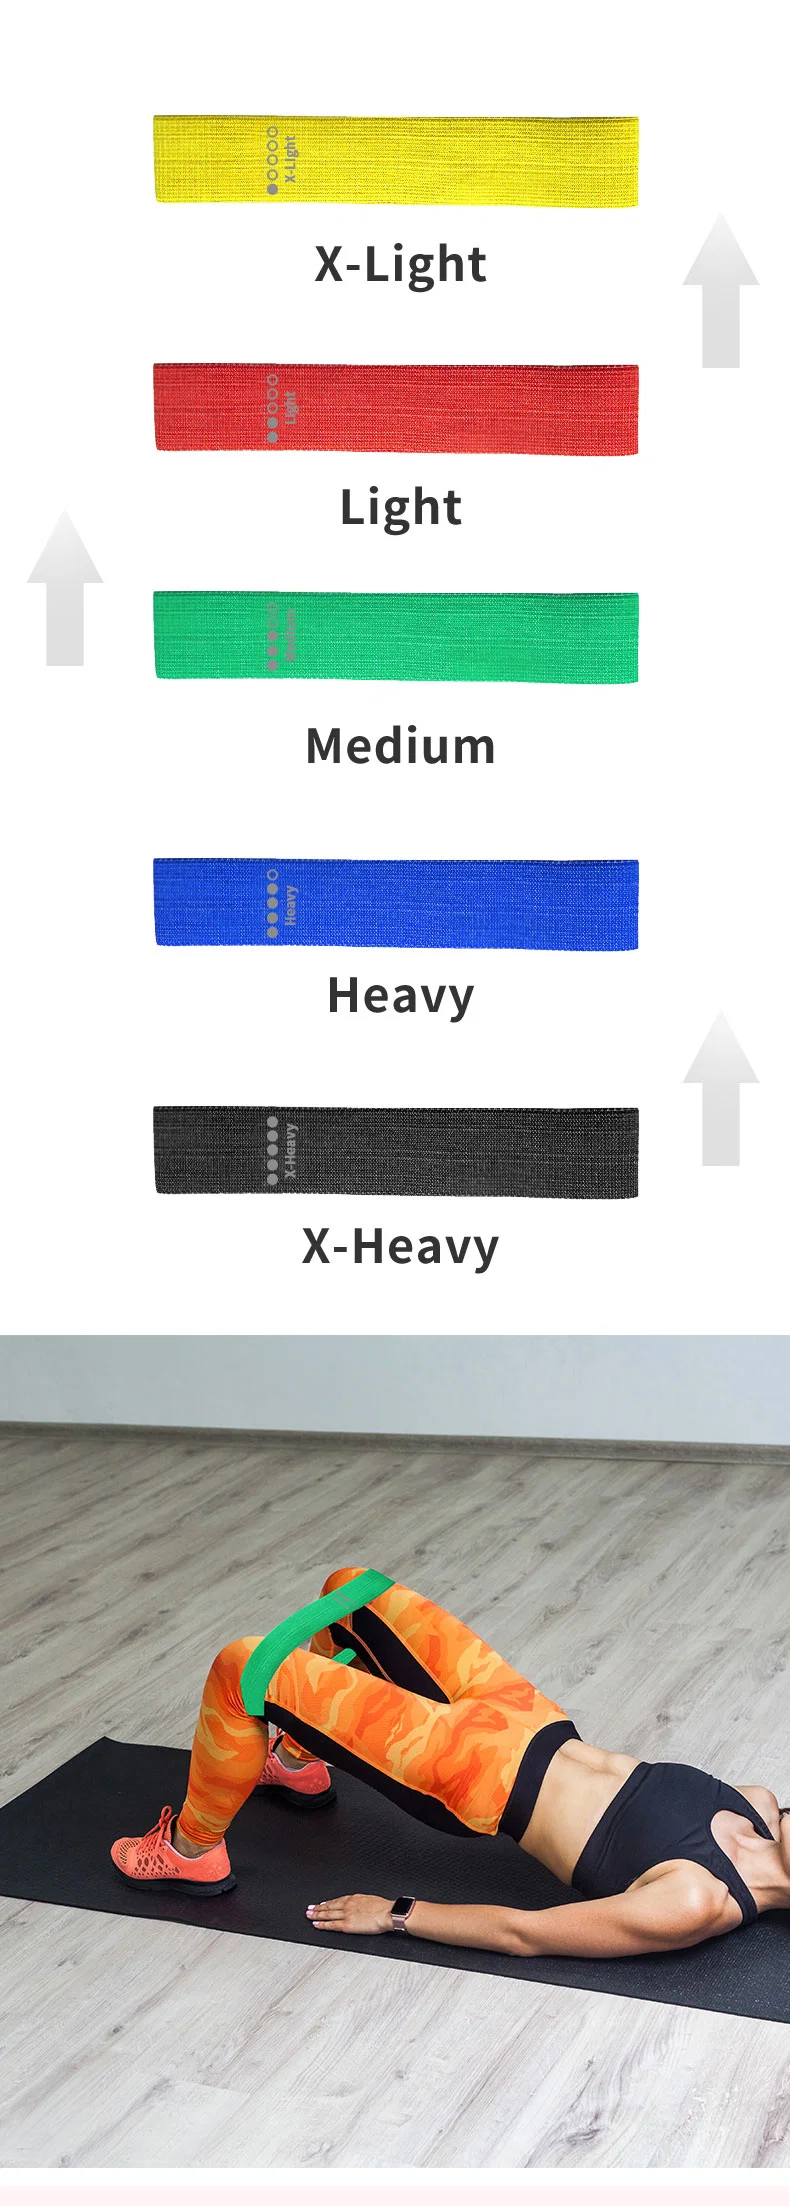 5 Levels Fabric Resistance Bands Non-Slip Booty Workout Bands